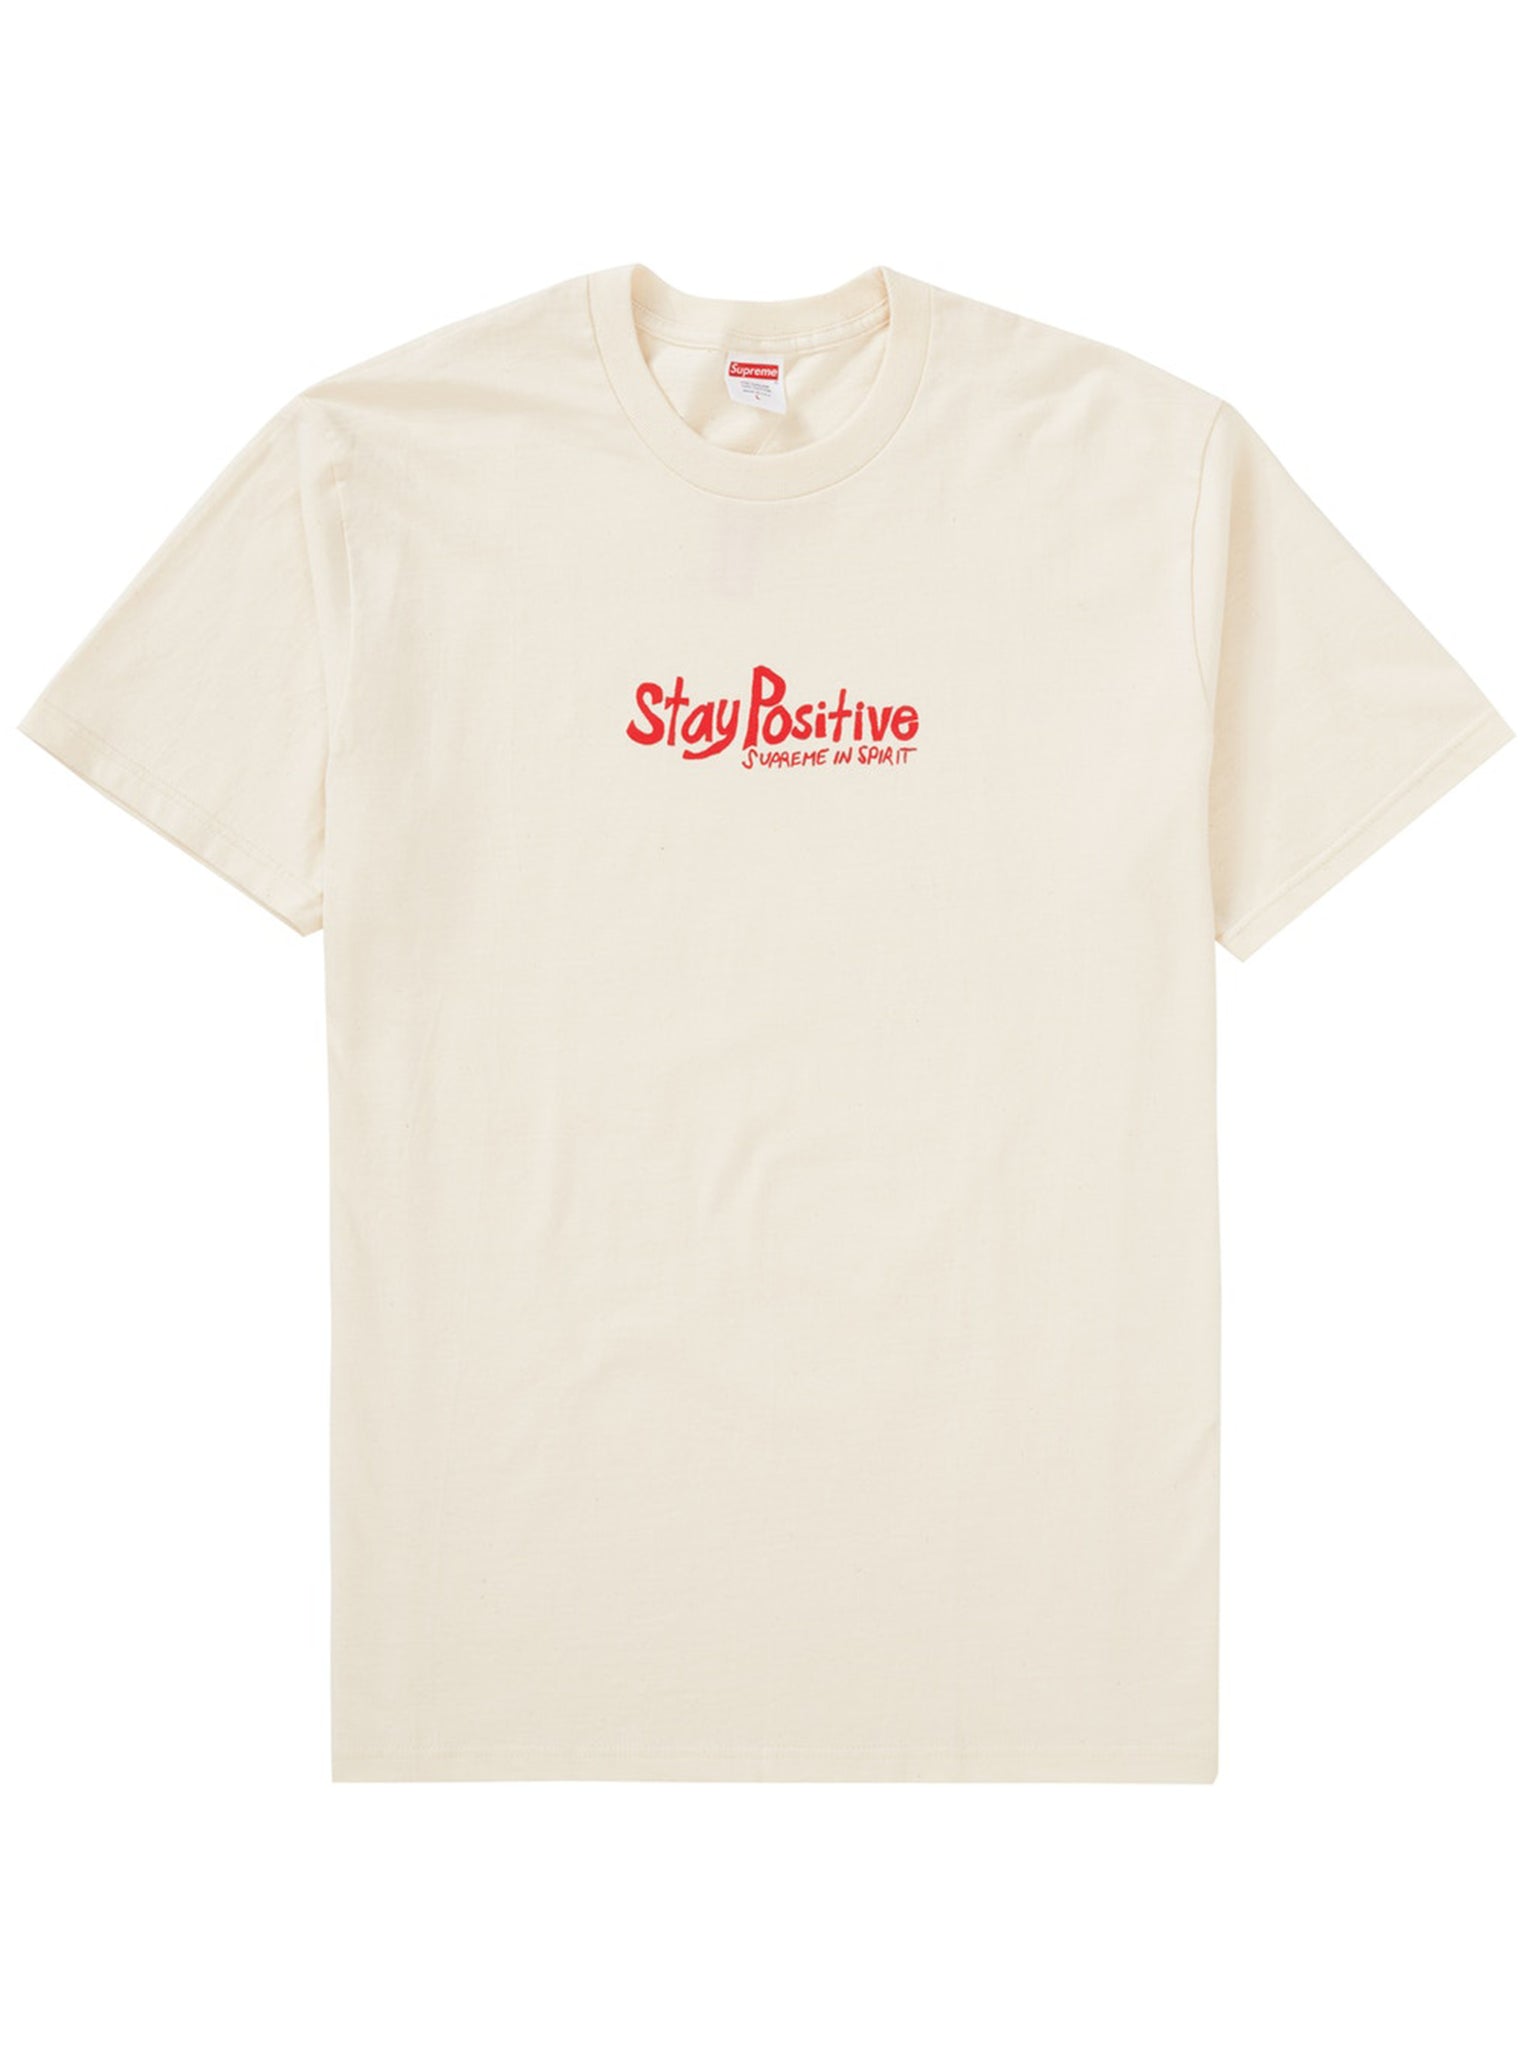 Supreme Stay Positive Tee NATURAL [FW20] Prior